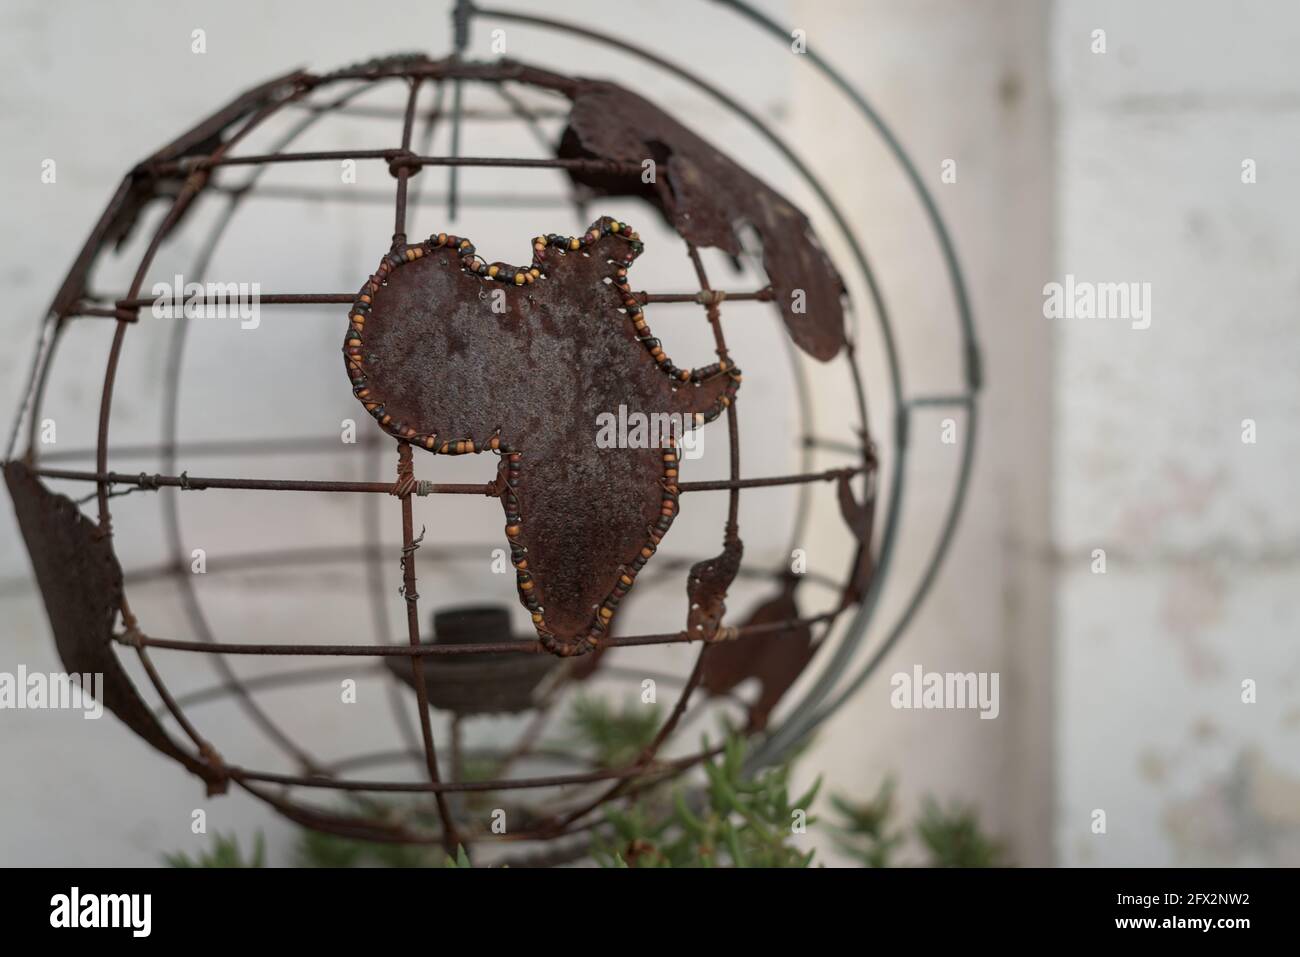 A wire workers globe and the beaded outline of the African continent Stock Photo